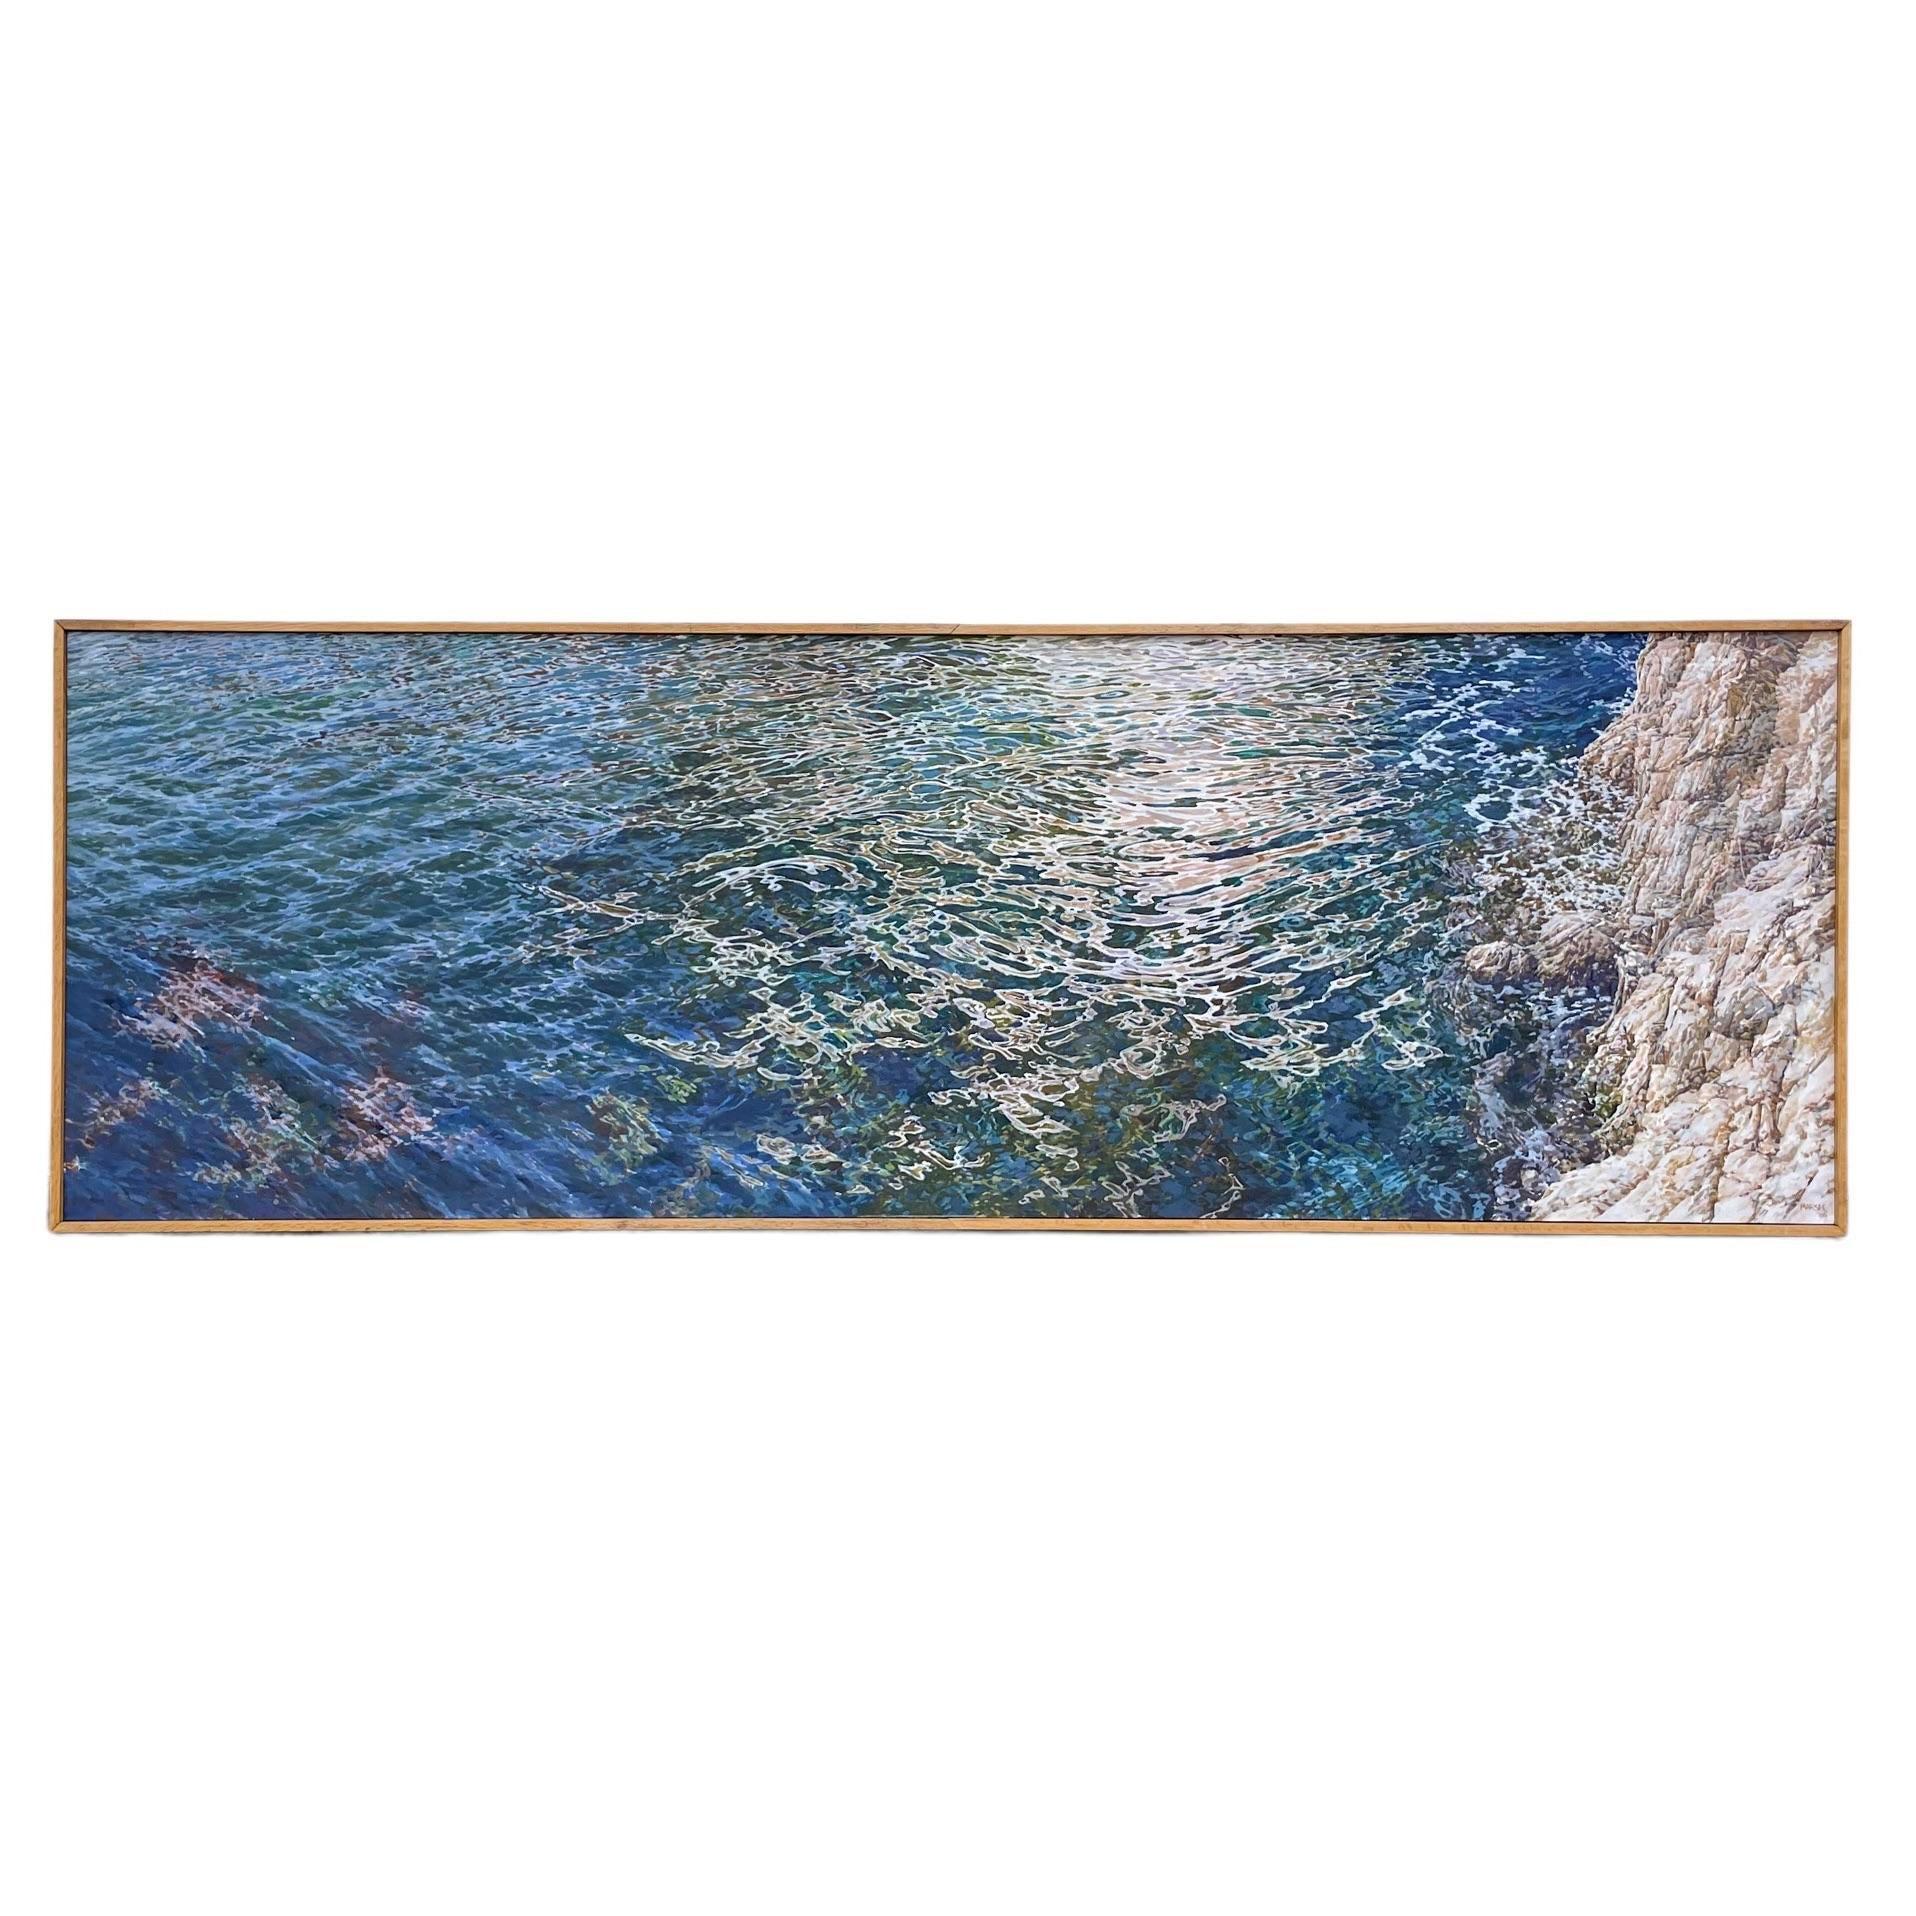 American Bruce Marsh Oversized 24 ' Diptych Waterscape Oil on Canvas 